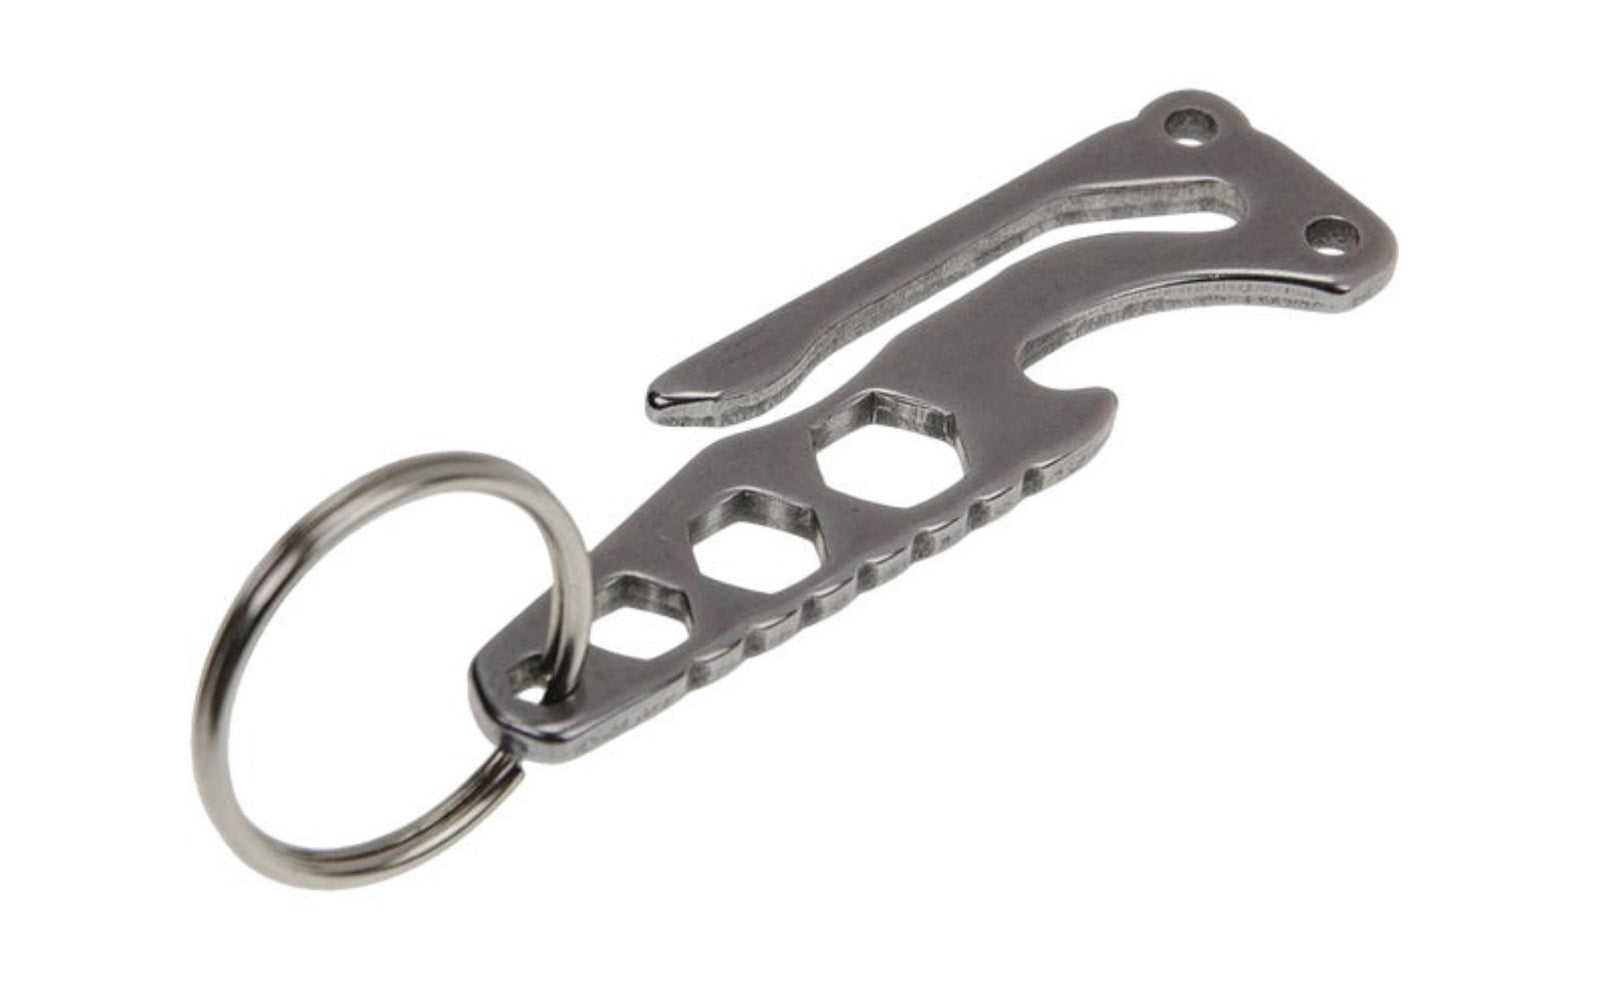 4-in-1 Stainless Pocket Clip Multi-Tool. Suspension style keychain easily attaches to belt or pocket. Stainless steel construction. Four functions including three hex wrenches and bottle opener.  Made by Lucky Line.